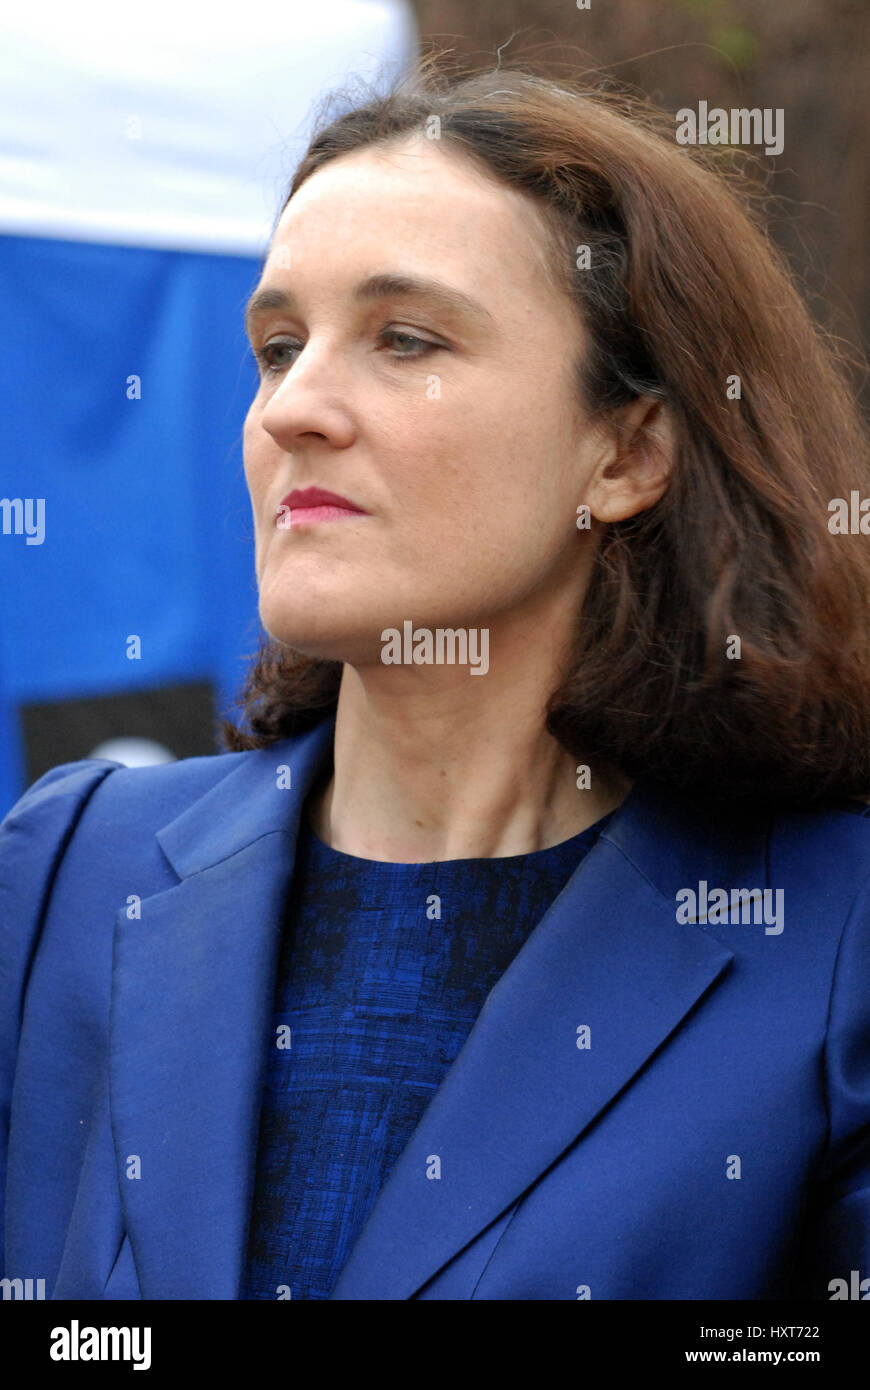 London, UK. 29th Mar, 2017. Theresa De Villiersl outside the Houses of Parliament on day of Article 50 withdrawing the UK from the EU sent to Brussels. Credit: JOHNNY ARMSTEAD/Alamy Live News Stock Photo